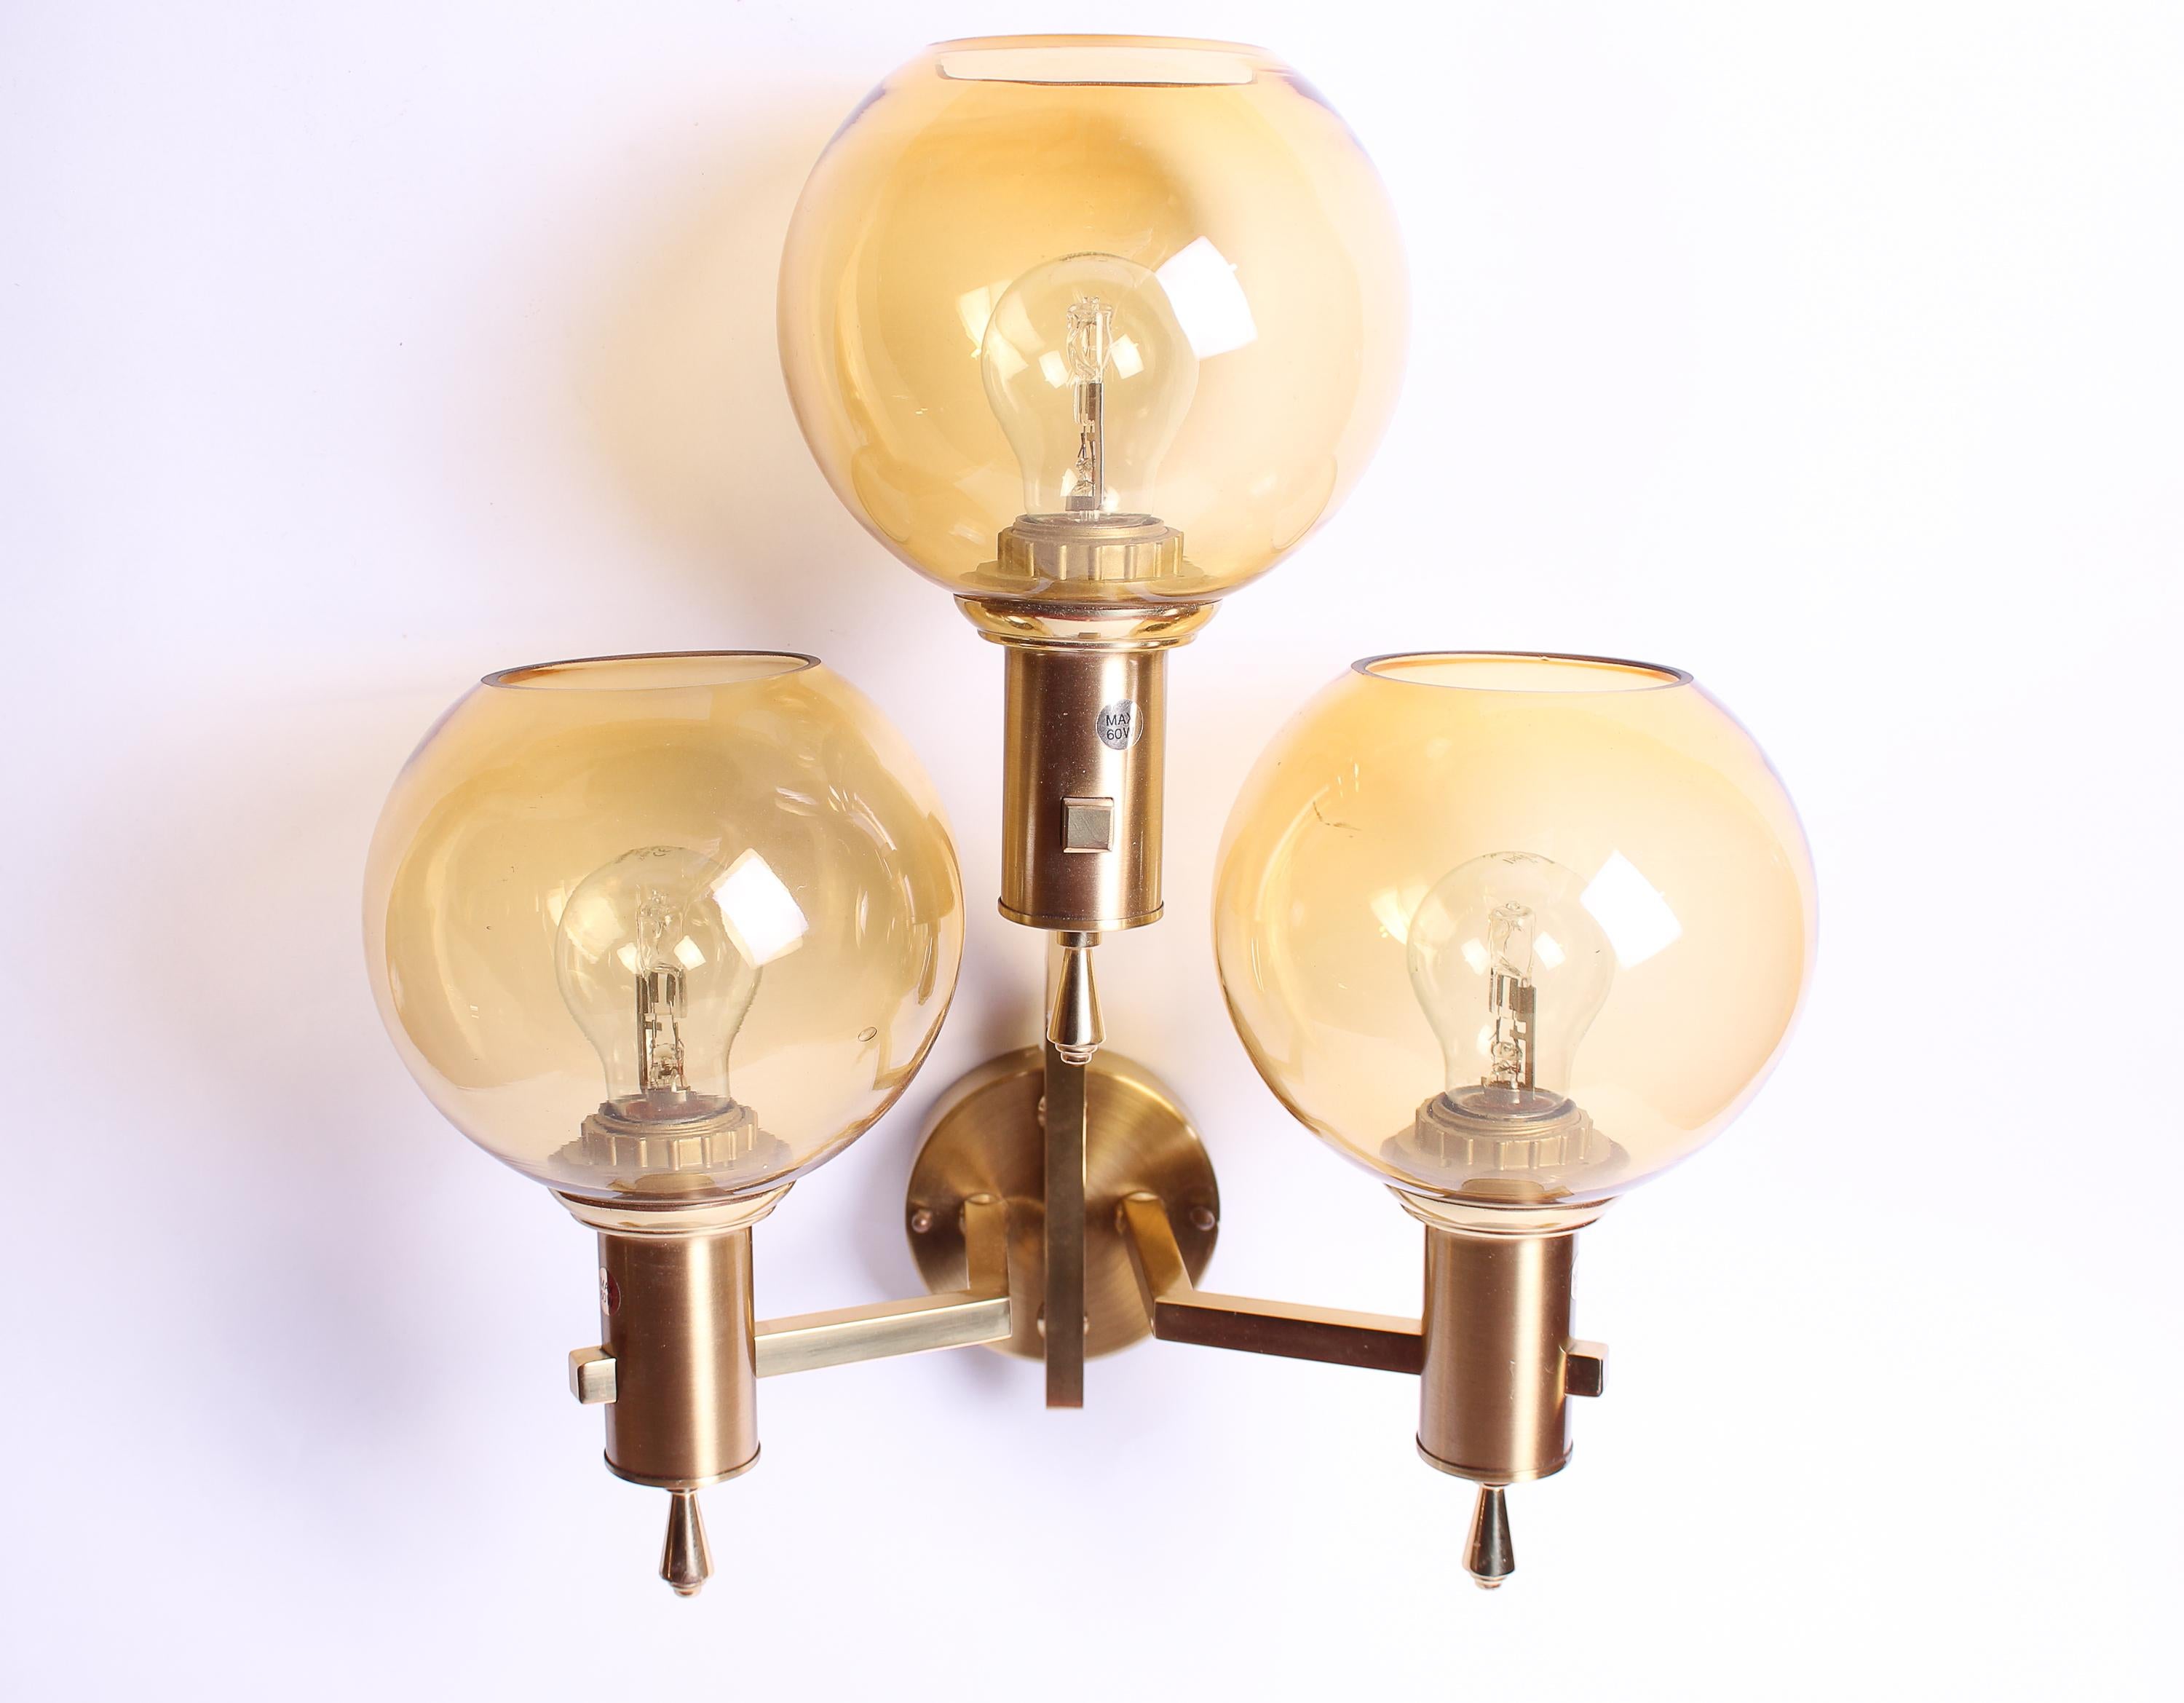 Two mid-century wall lamps produced by EWÅ Värnamo. The lamps are made out of brass with round glass shades. Excellent vintage condition with signs of usage consistent with age. Two available.